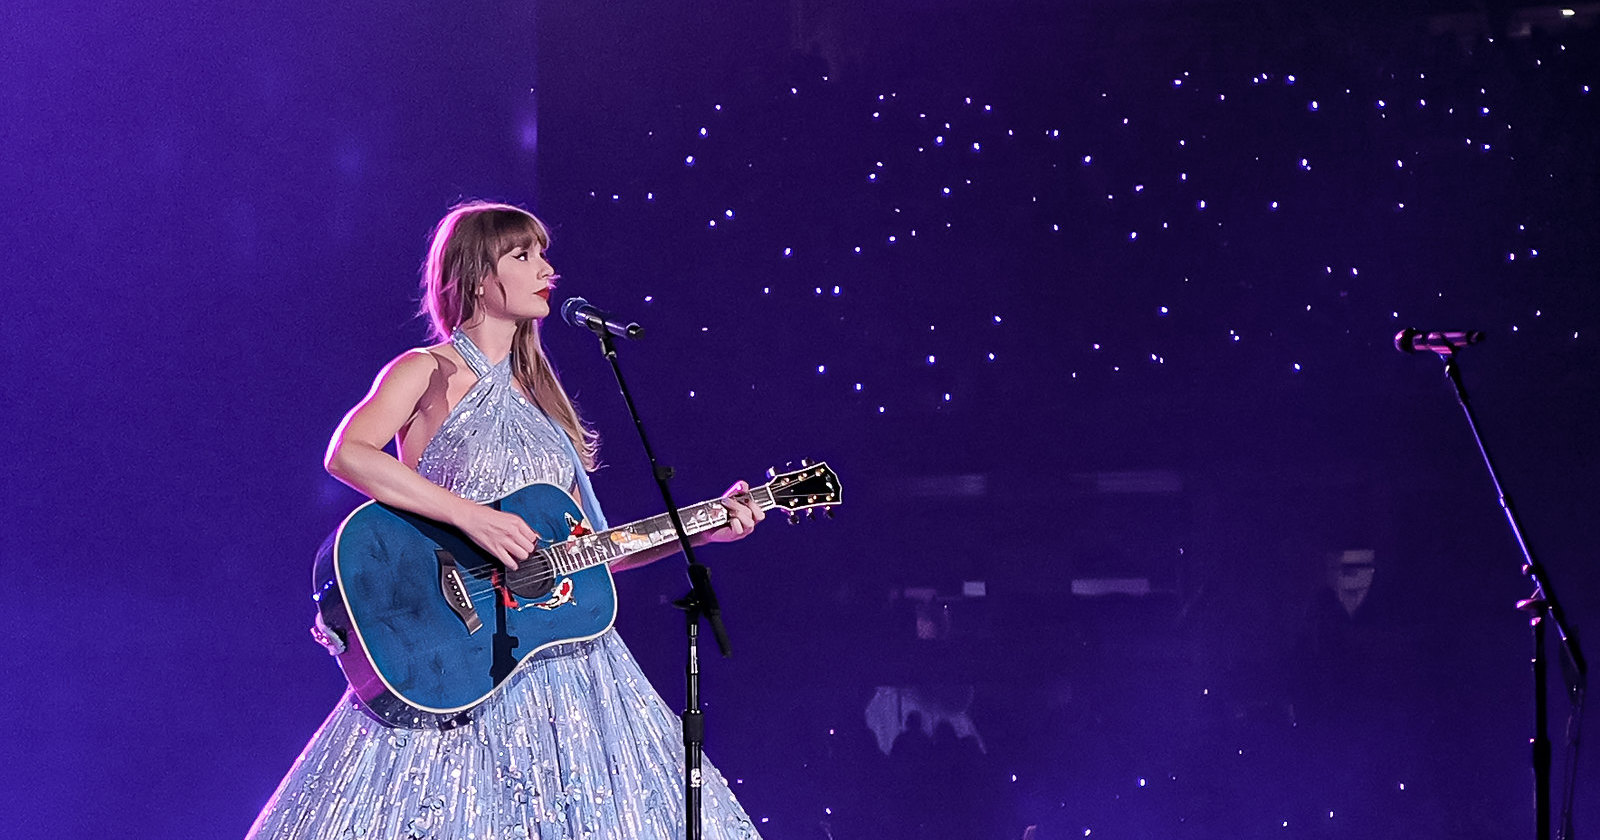 Swifties: Here's Where to Buy Taylor Swift Eras Tour Merch Online